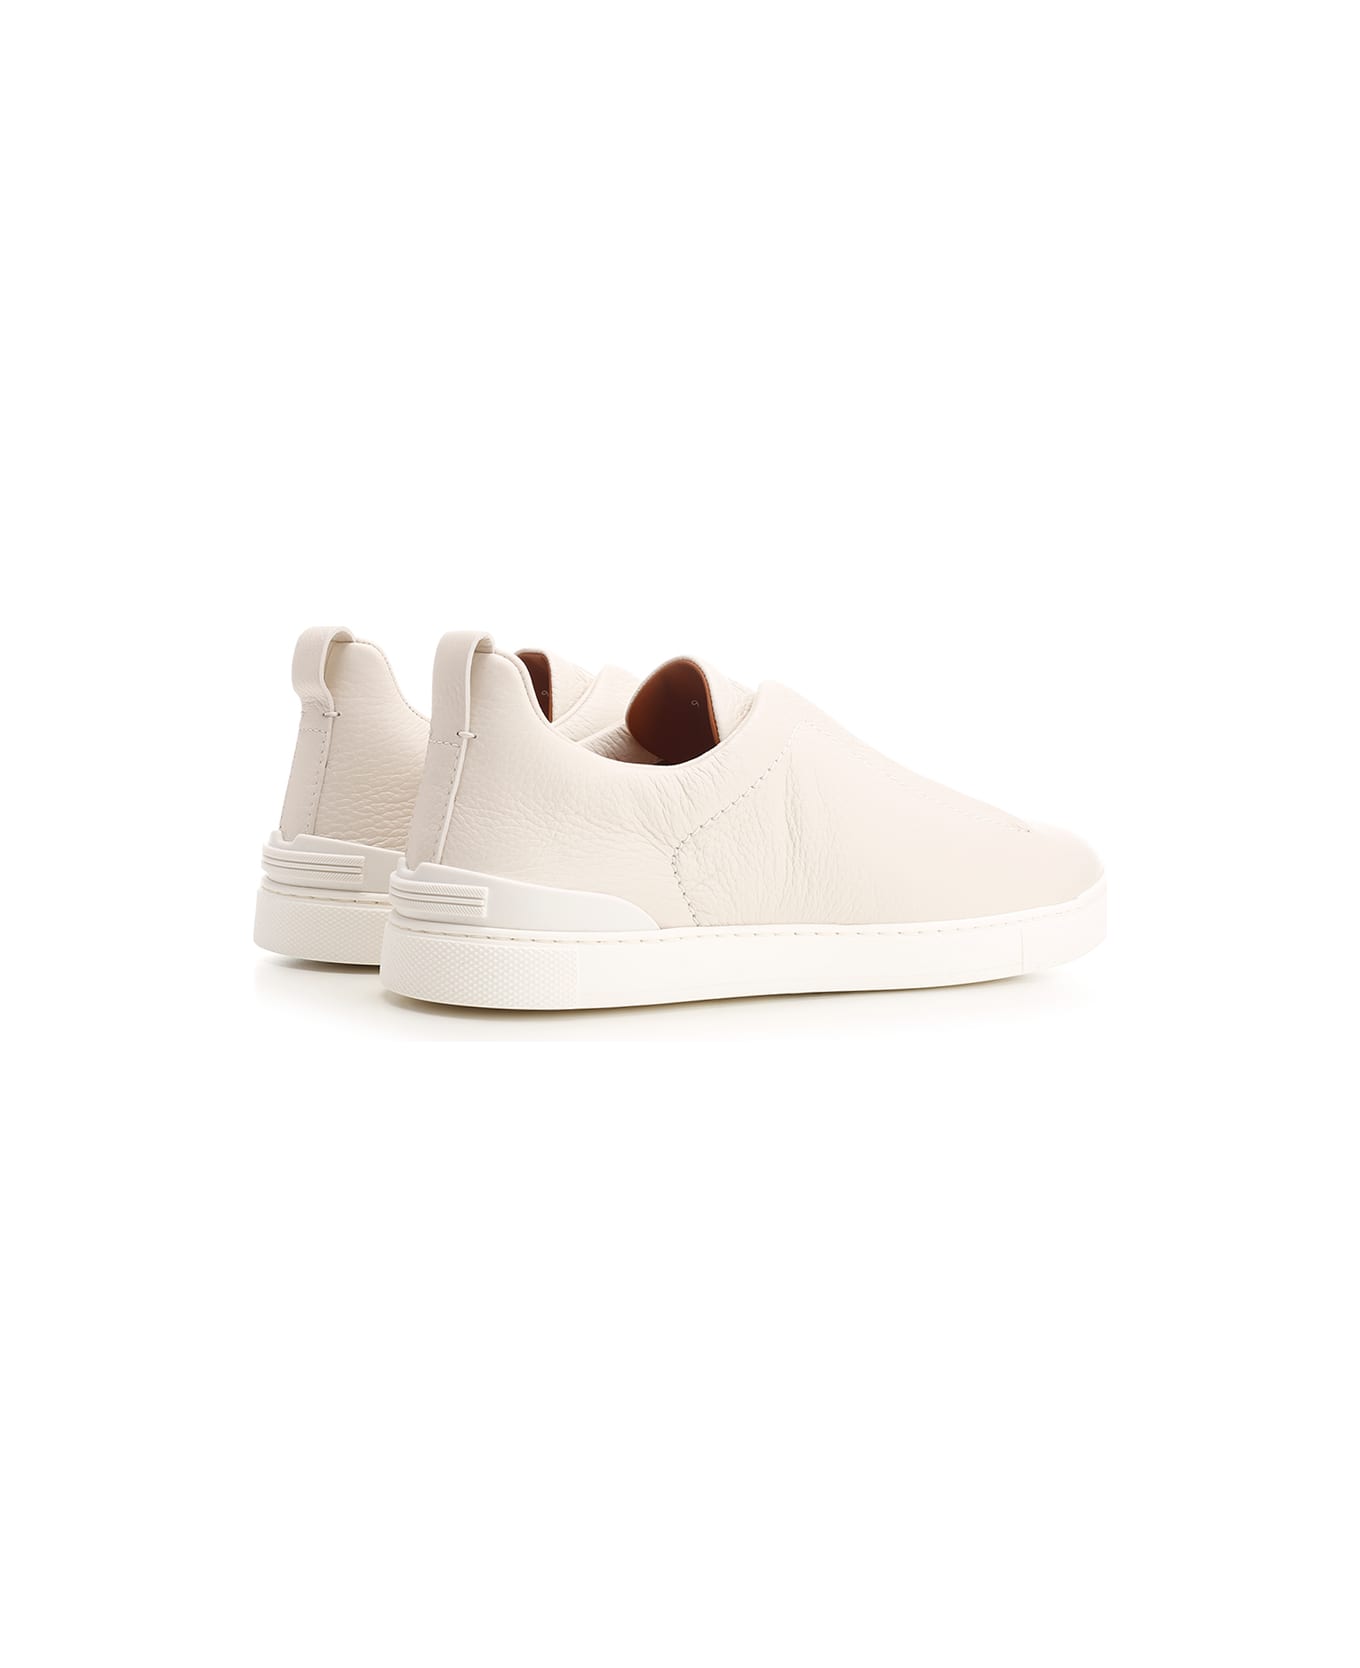 Zegna 'triple Stitch' Low Top Sneakers - White スニーカー